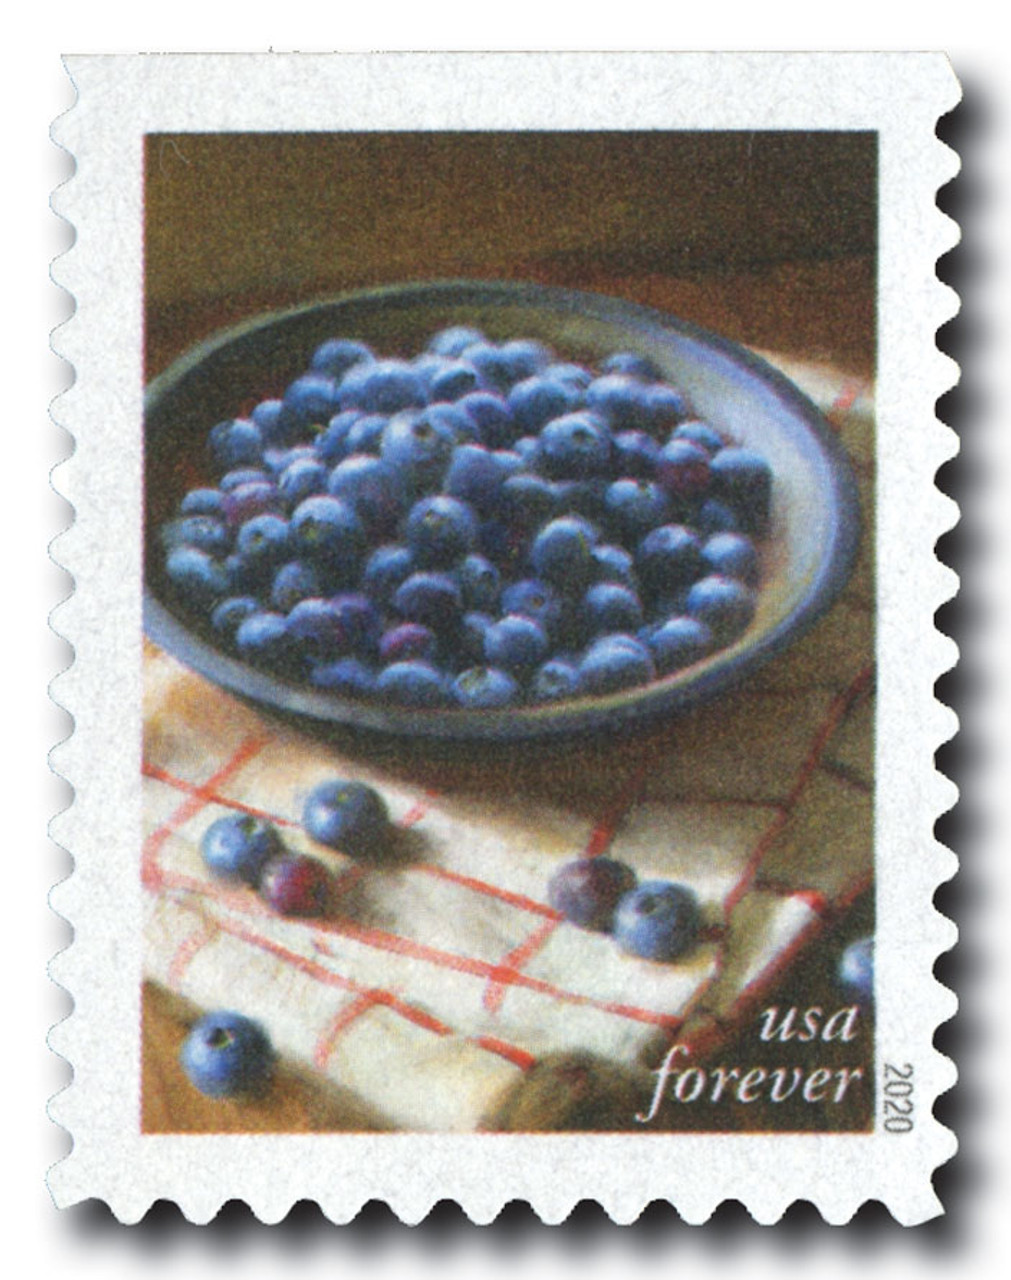 Forever Stamps First Class Postage Stamps Winter Berries 100pcs/Pack ~